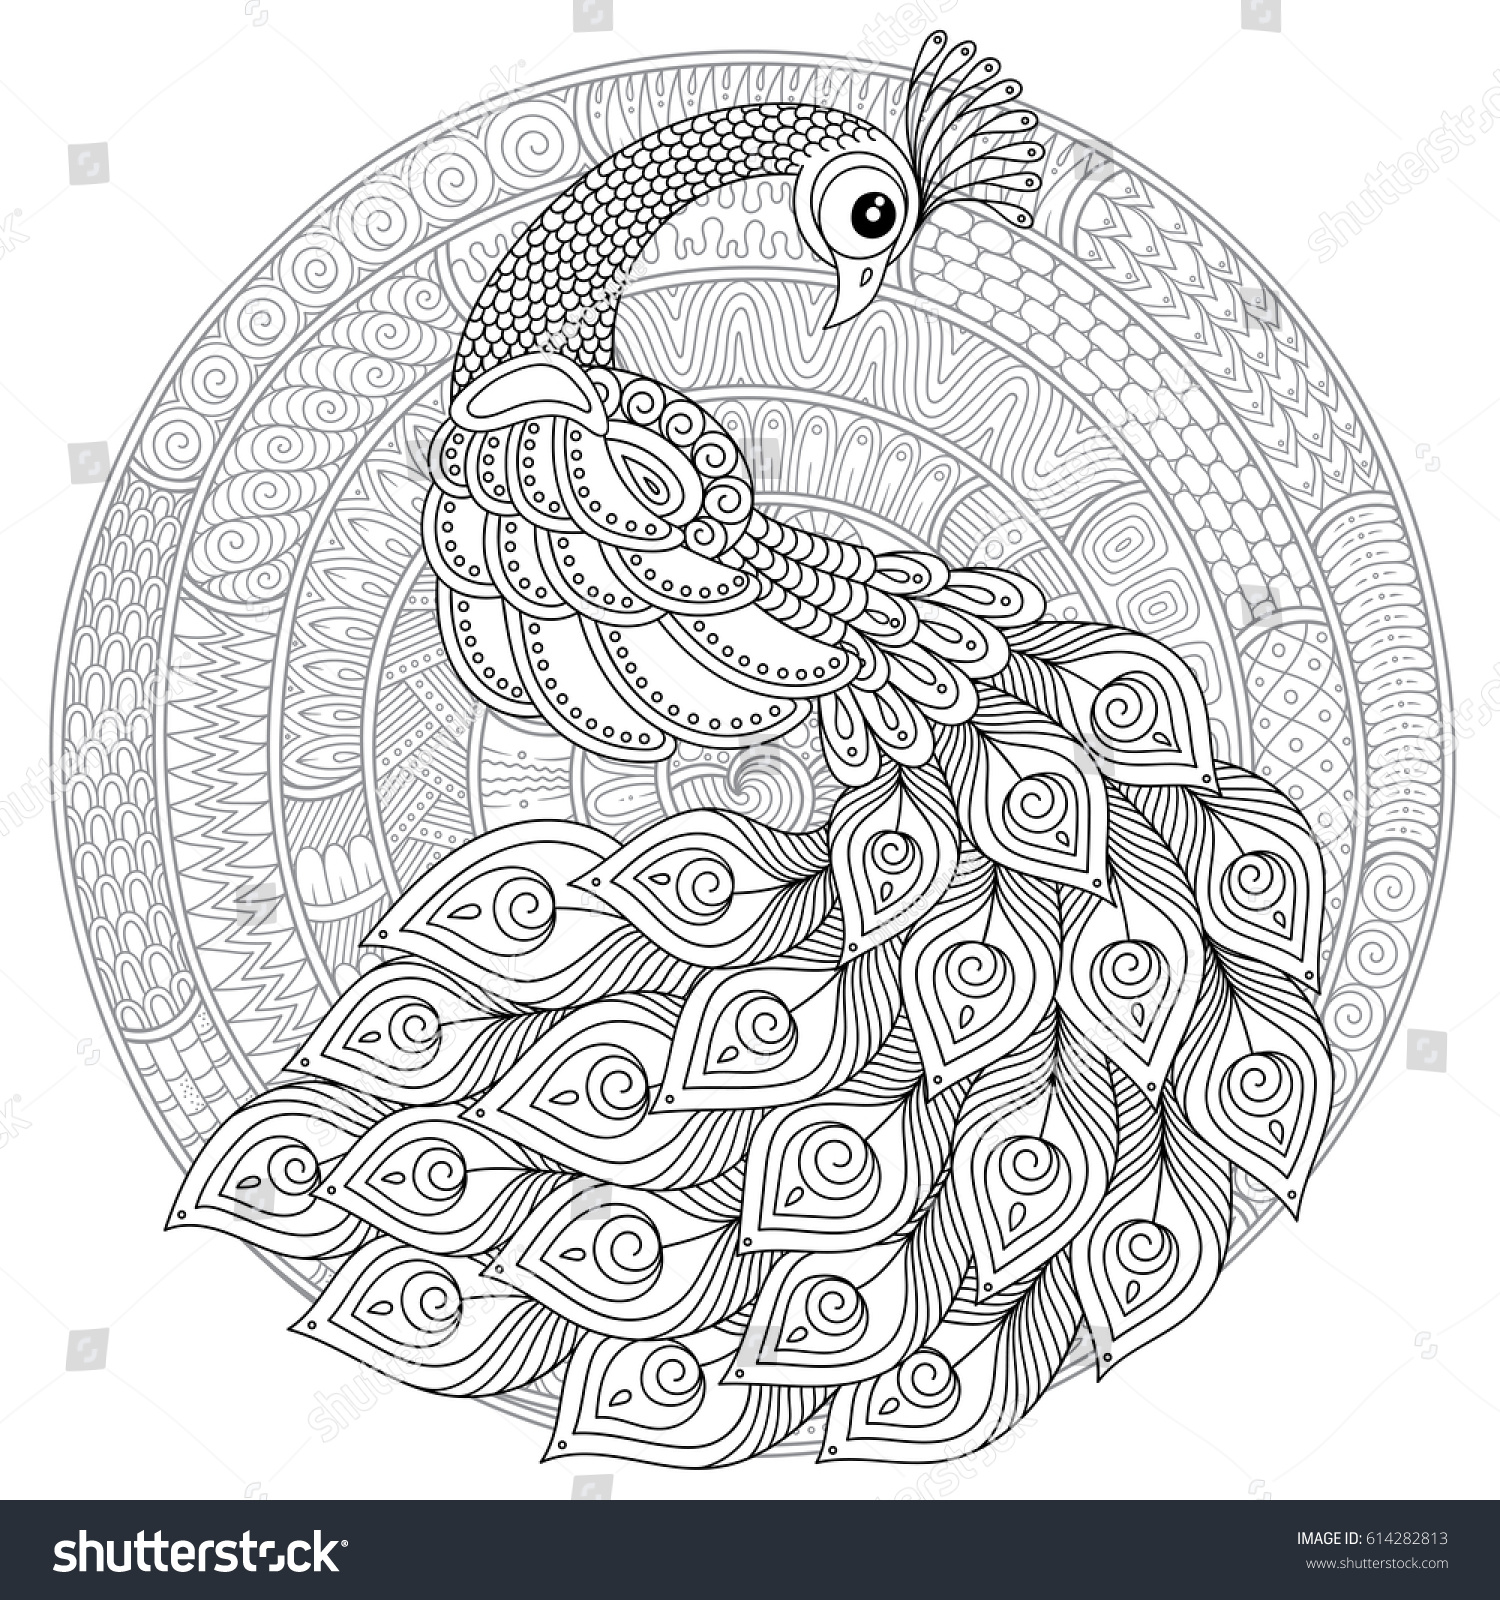 Pavo real mandala images stock photos d objects vectors